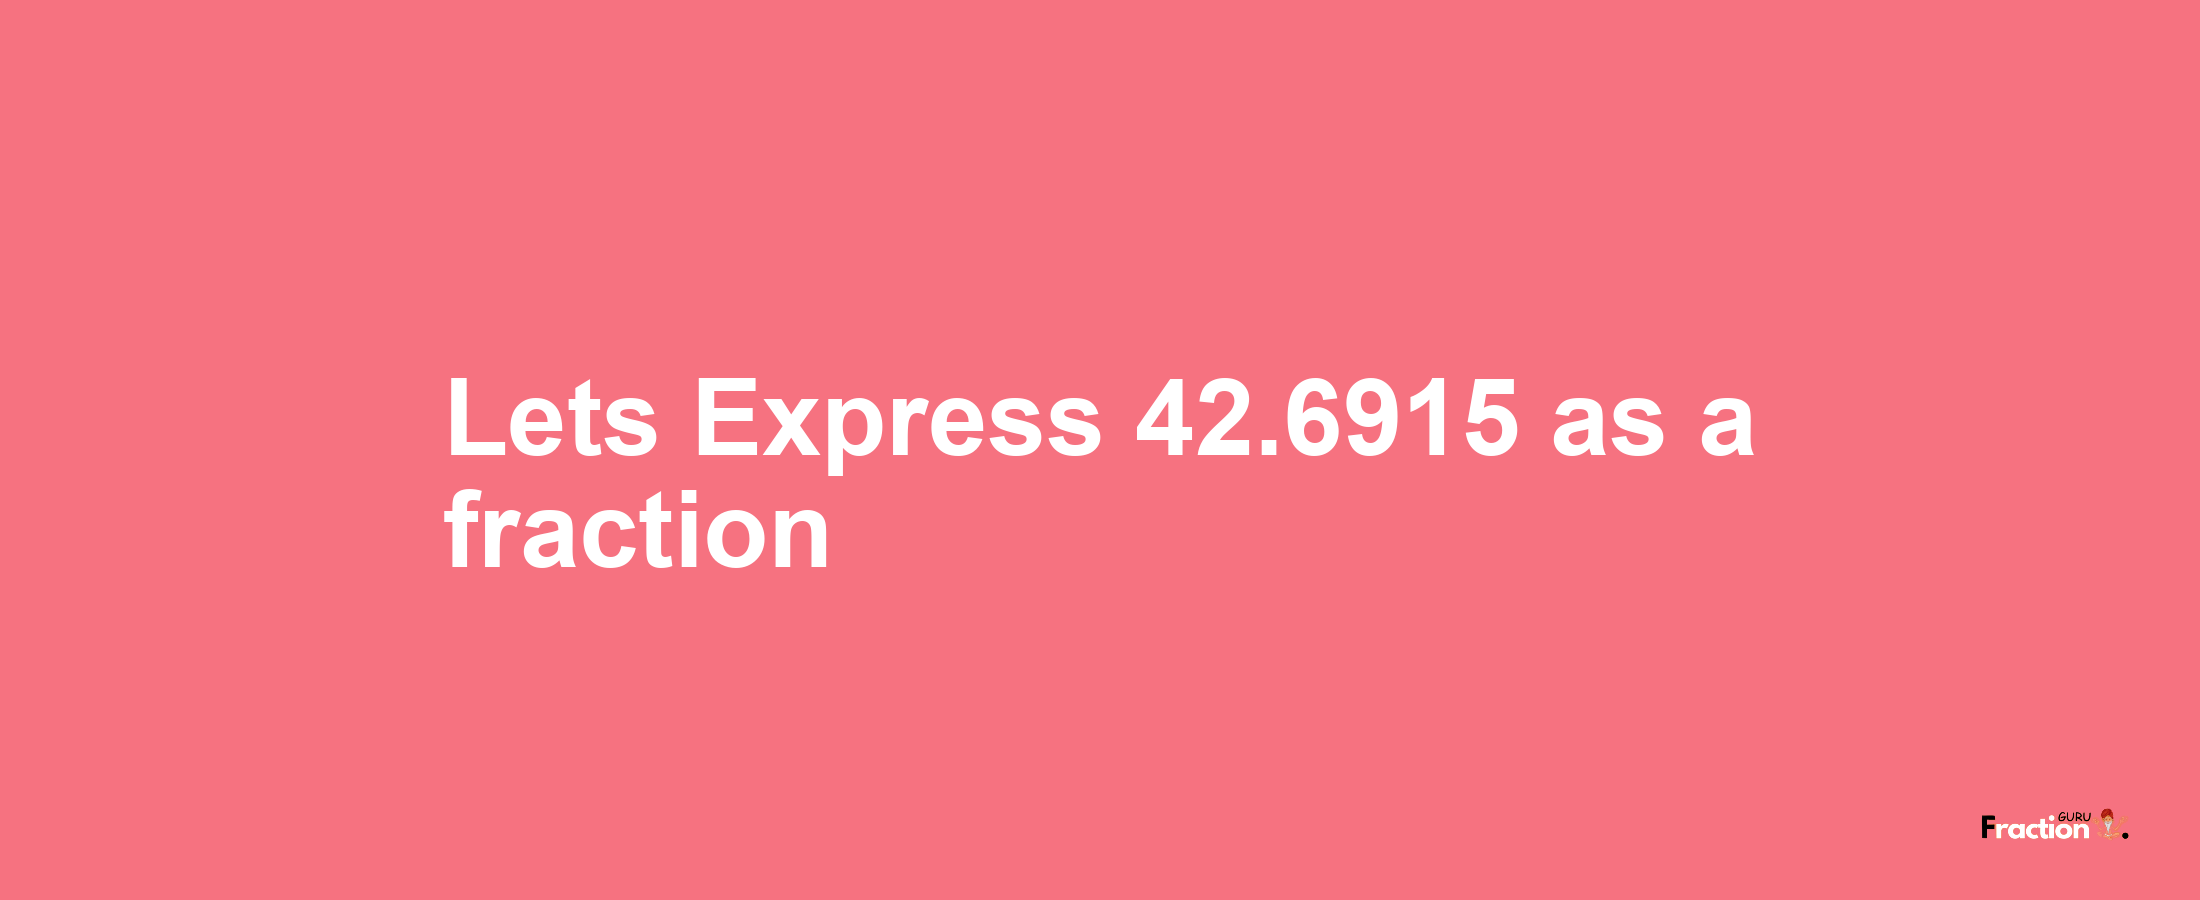 Lets Express 42.6915 as afraction